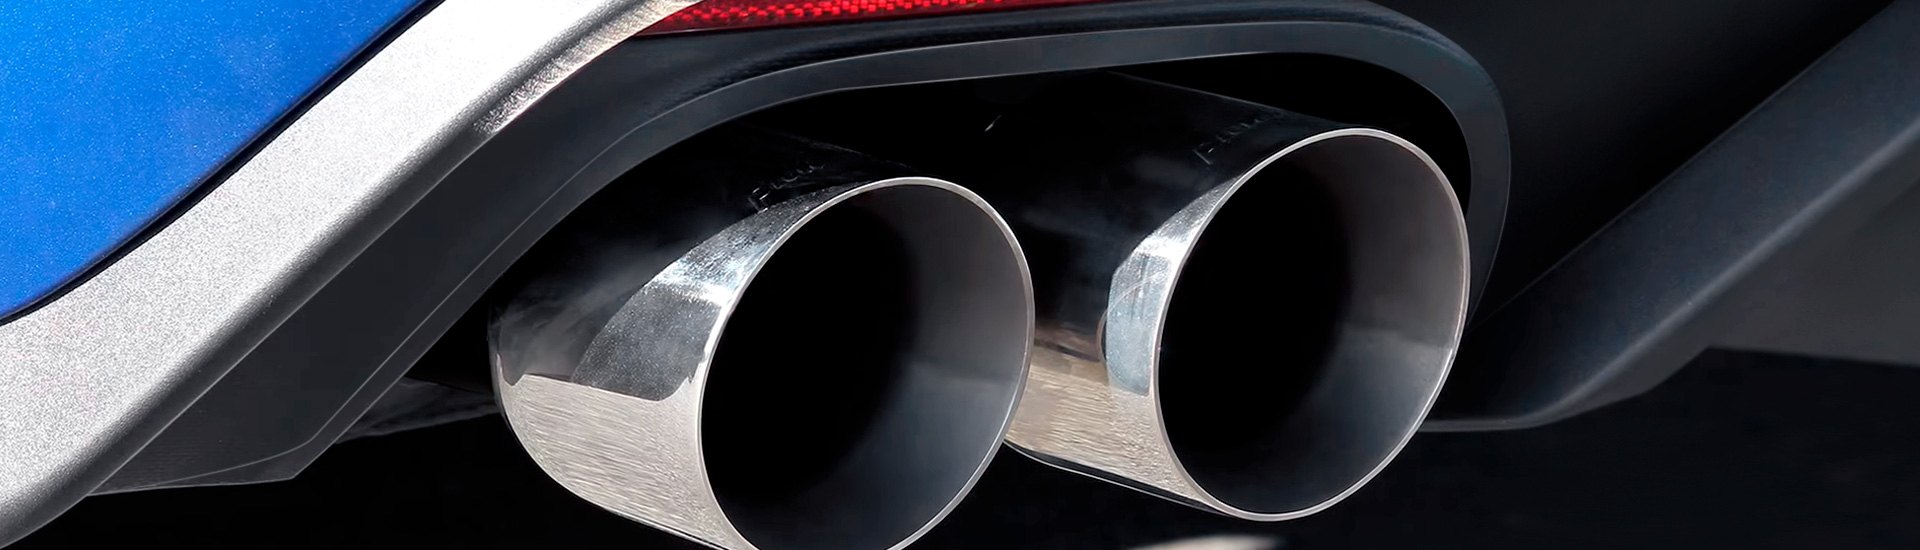 New Insane Flowmaster American Thunder Performance Exhaust For 18-19 Mustang